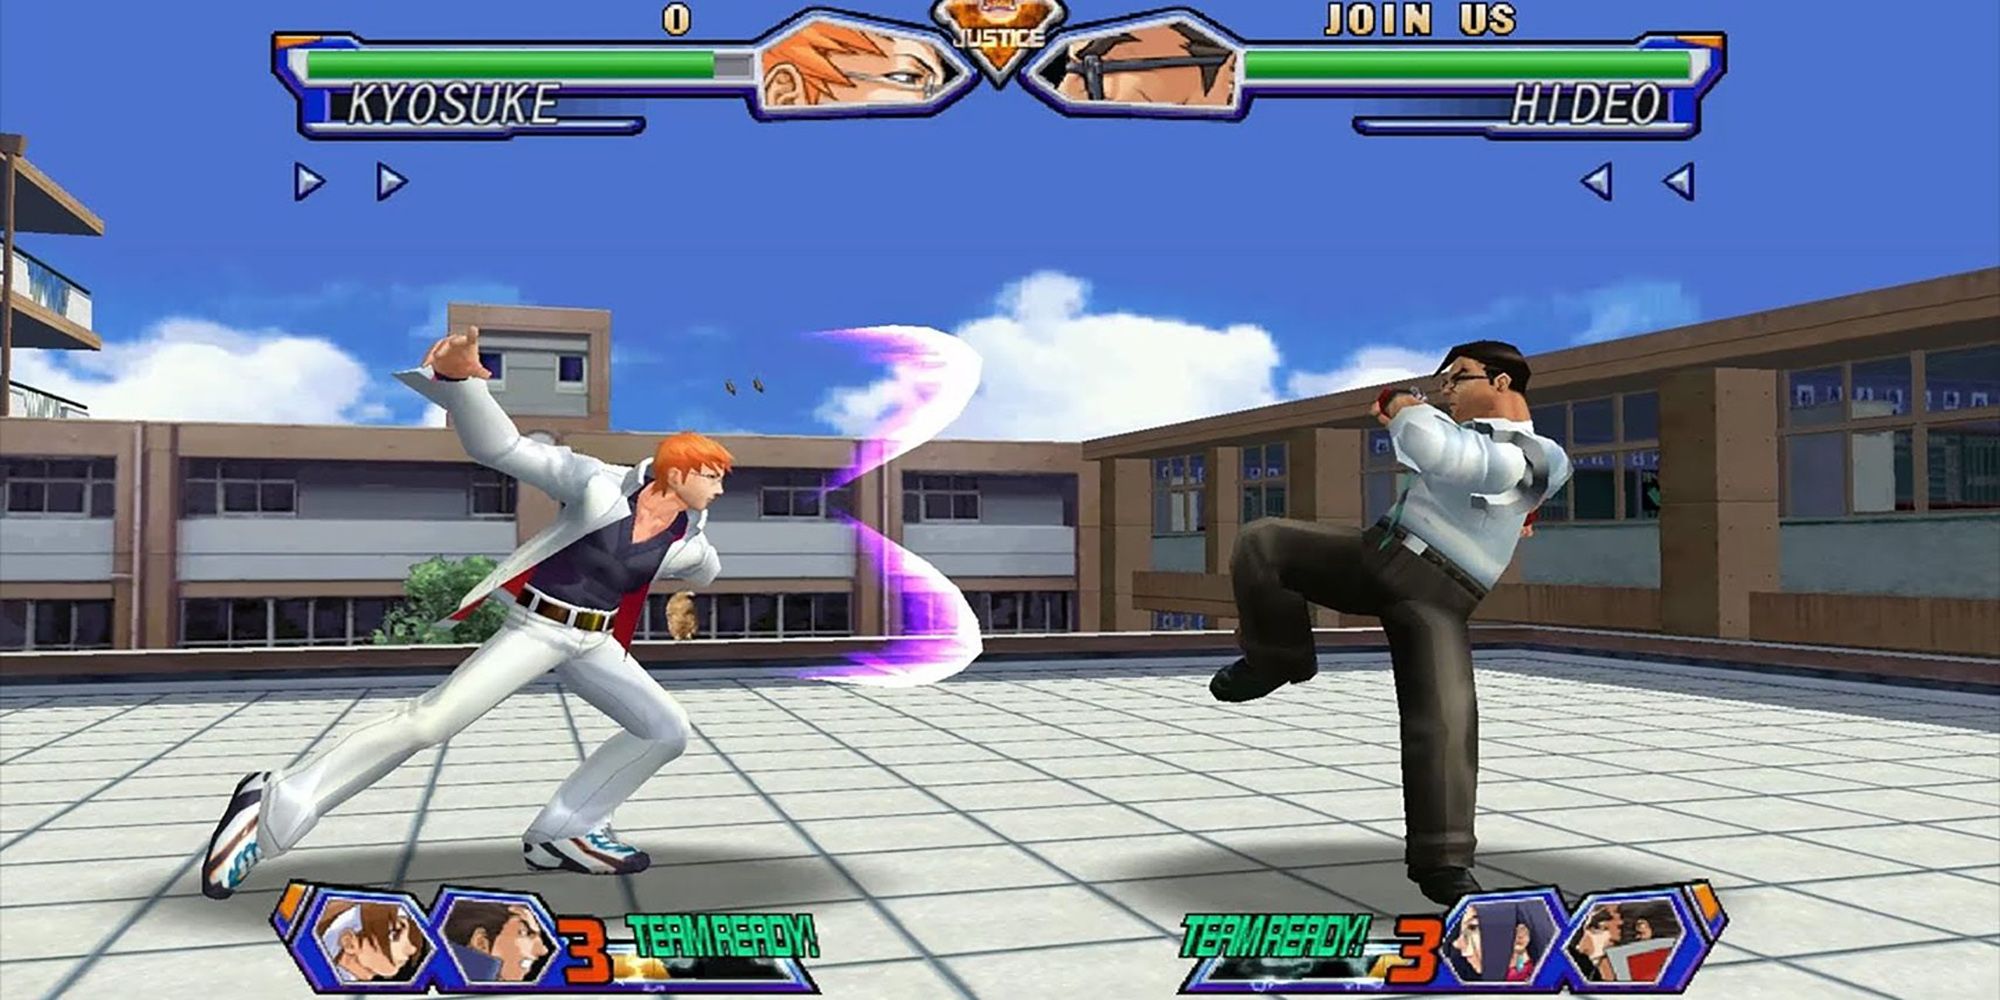 Kyosuke sends a projectile attack toward Hideo in a battle on a rooftop. Project Justice.